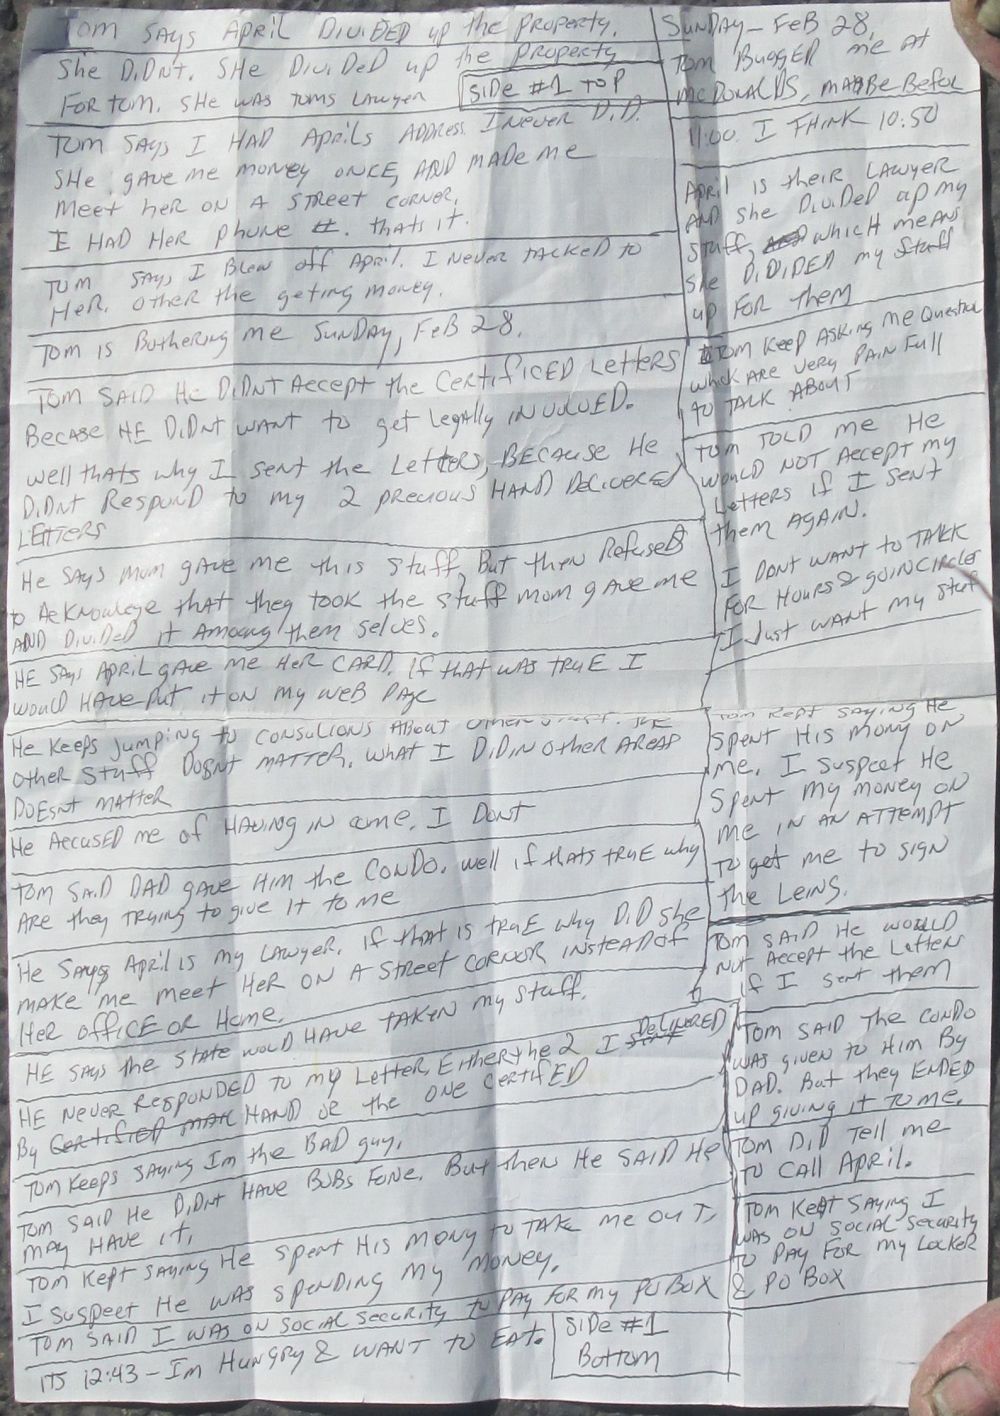 Sunday, Feburary 28, 2016 - Tom Diross's reply to the postcard - He came by McDonalds and these are my notes - Tom Diross, Tom Di Ross, Tom Deross, Tom De Ross  - Jean DiRoss, Jean DeRoss, Jean De Ross, Jean Di Ross